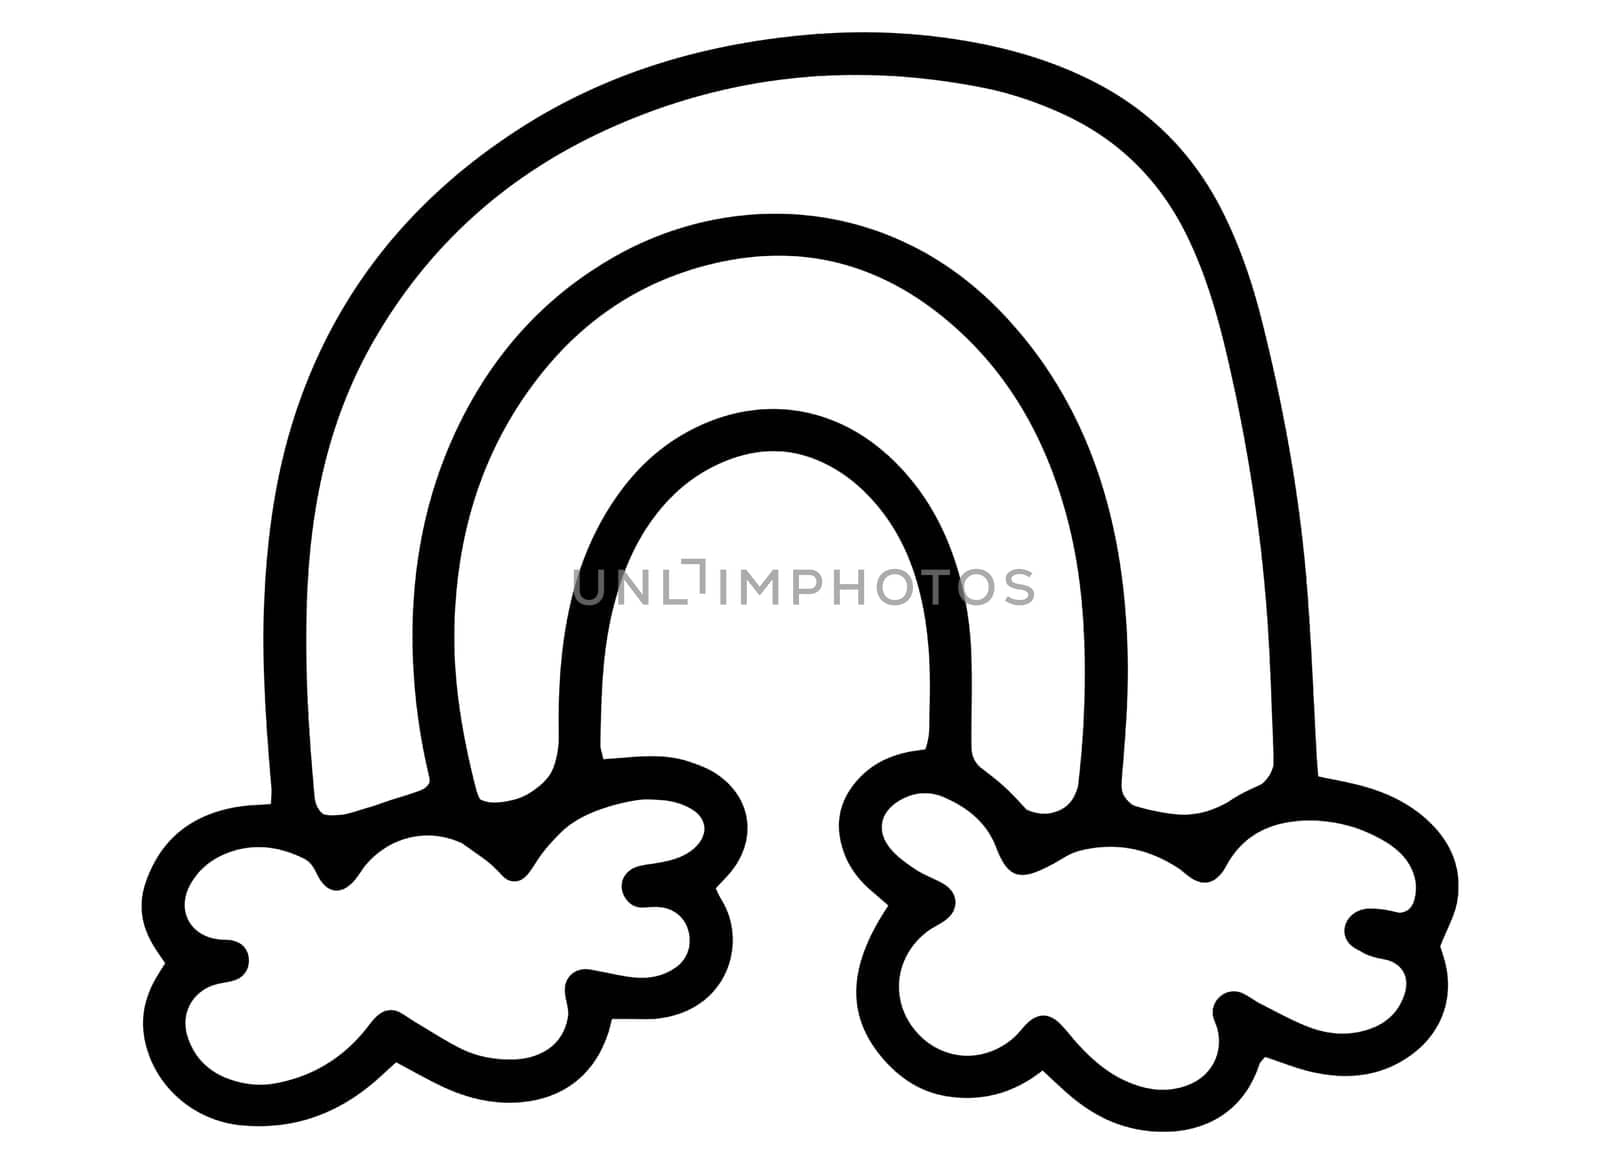 Printable Coloring Page for Kids. Black and White Rainbow Abstract Isolated Illustration. Coloring Book with Rainbow and Clouds.